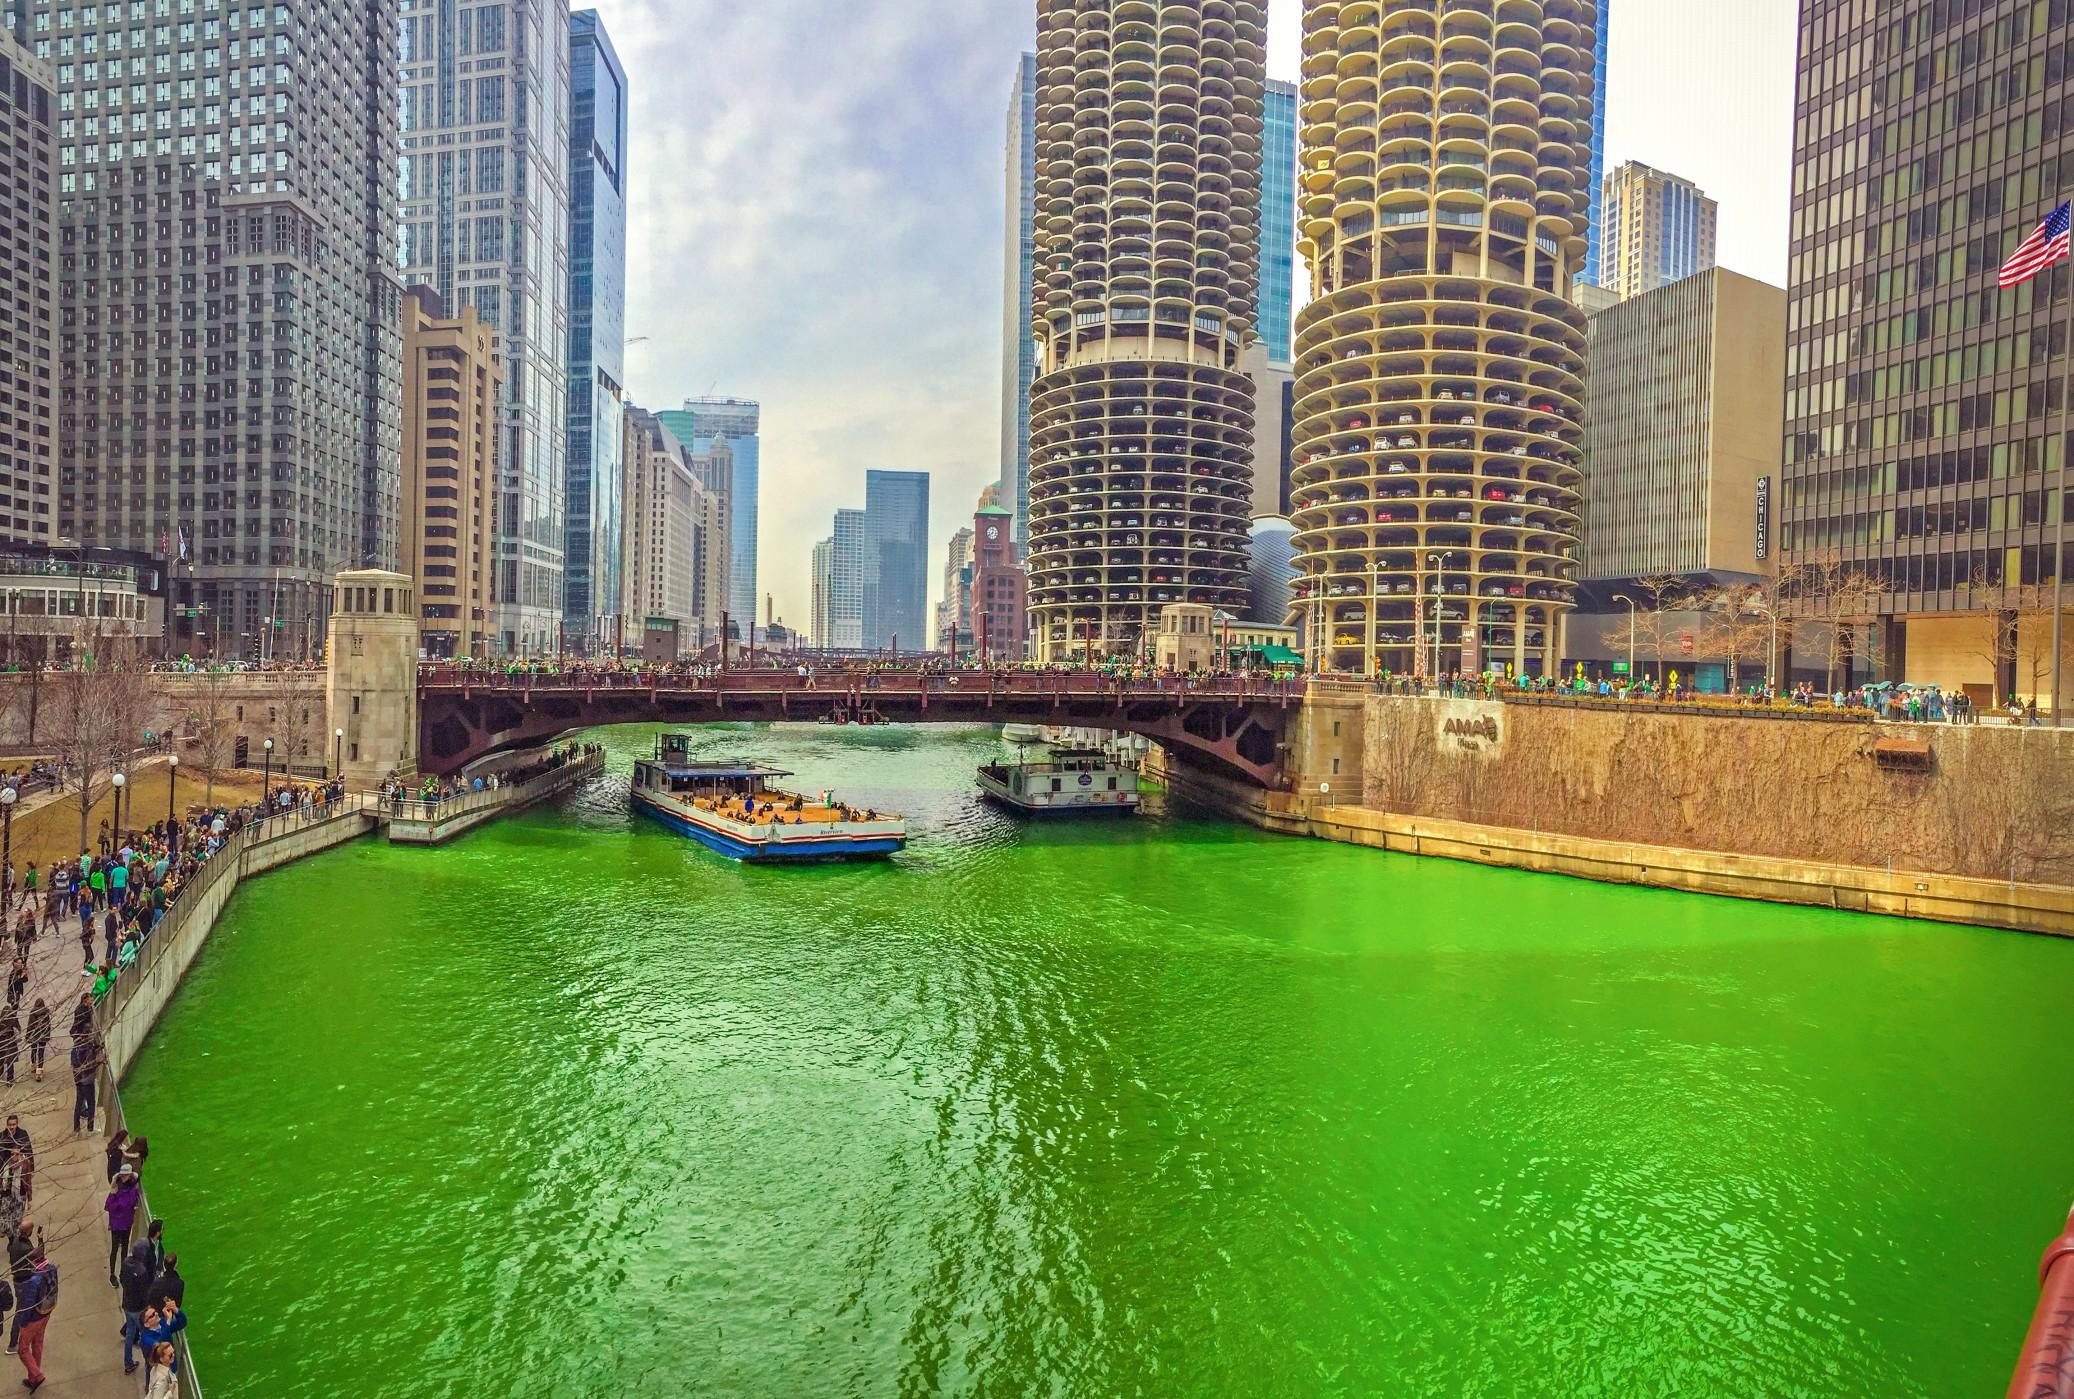 The river in Chicago dyed green for St. Patricks Day.